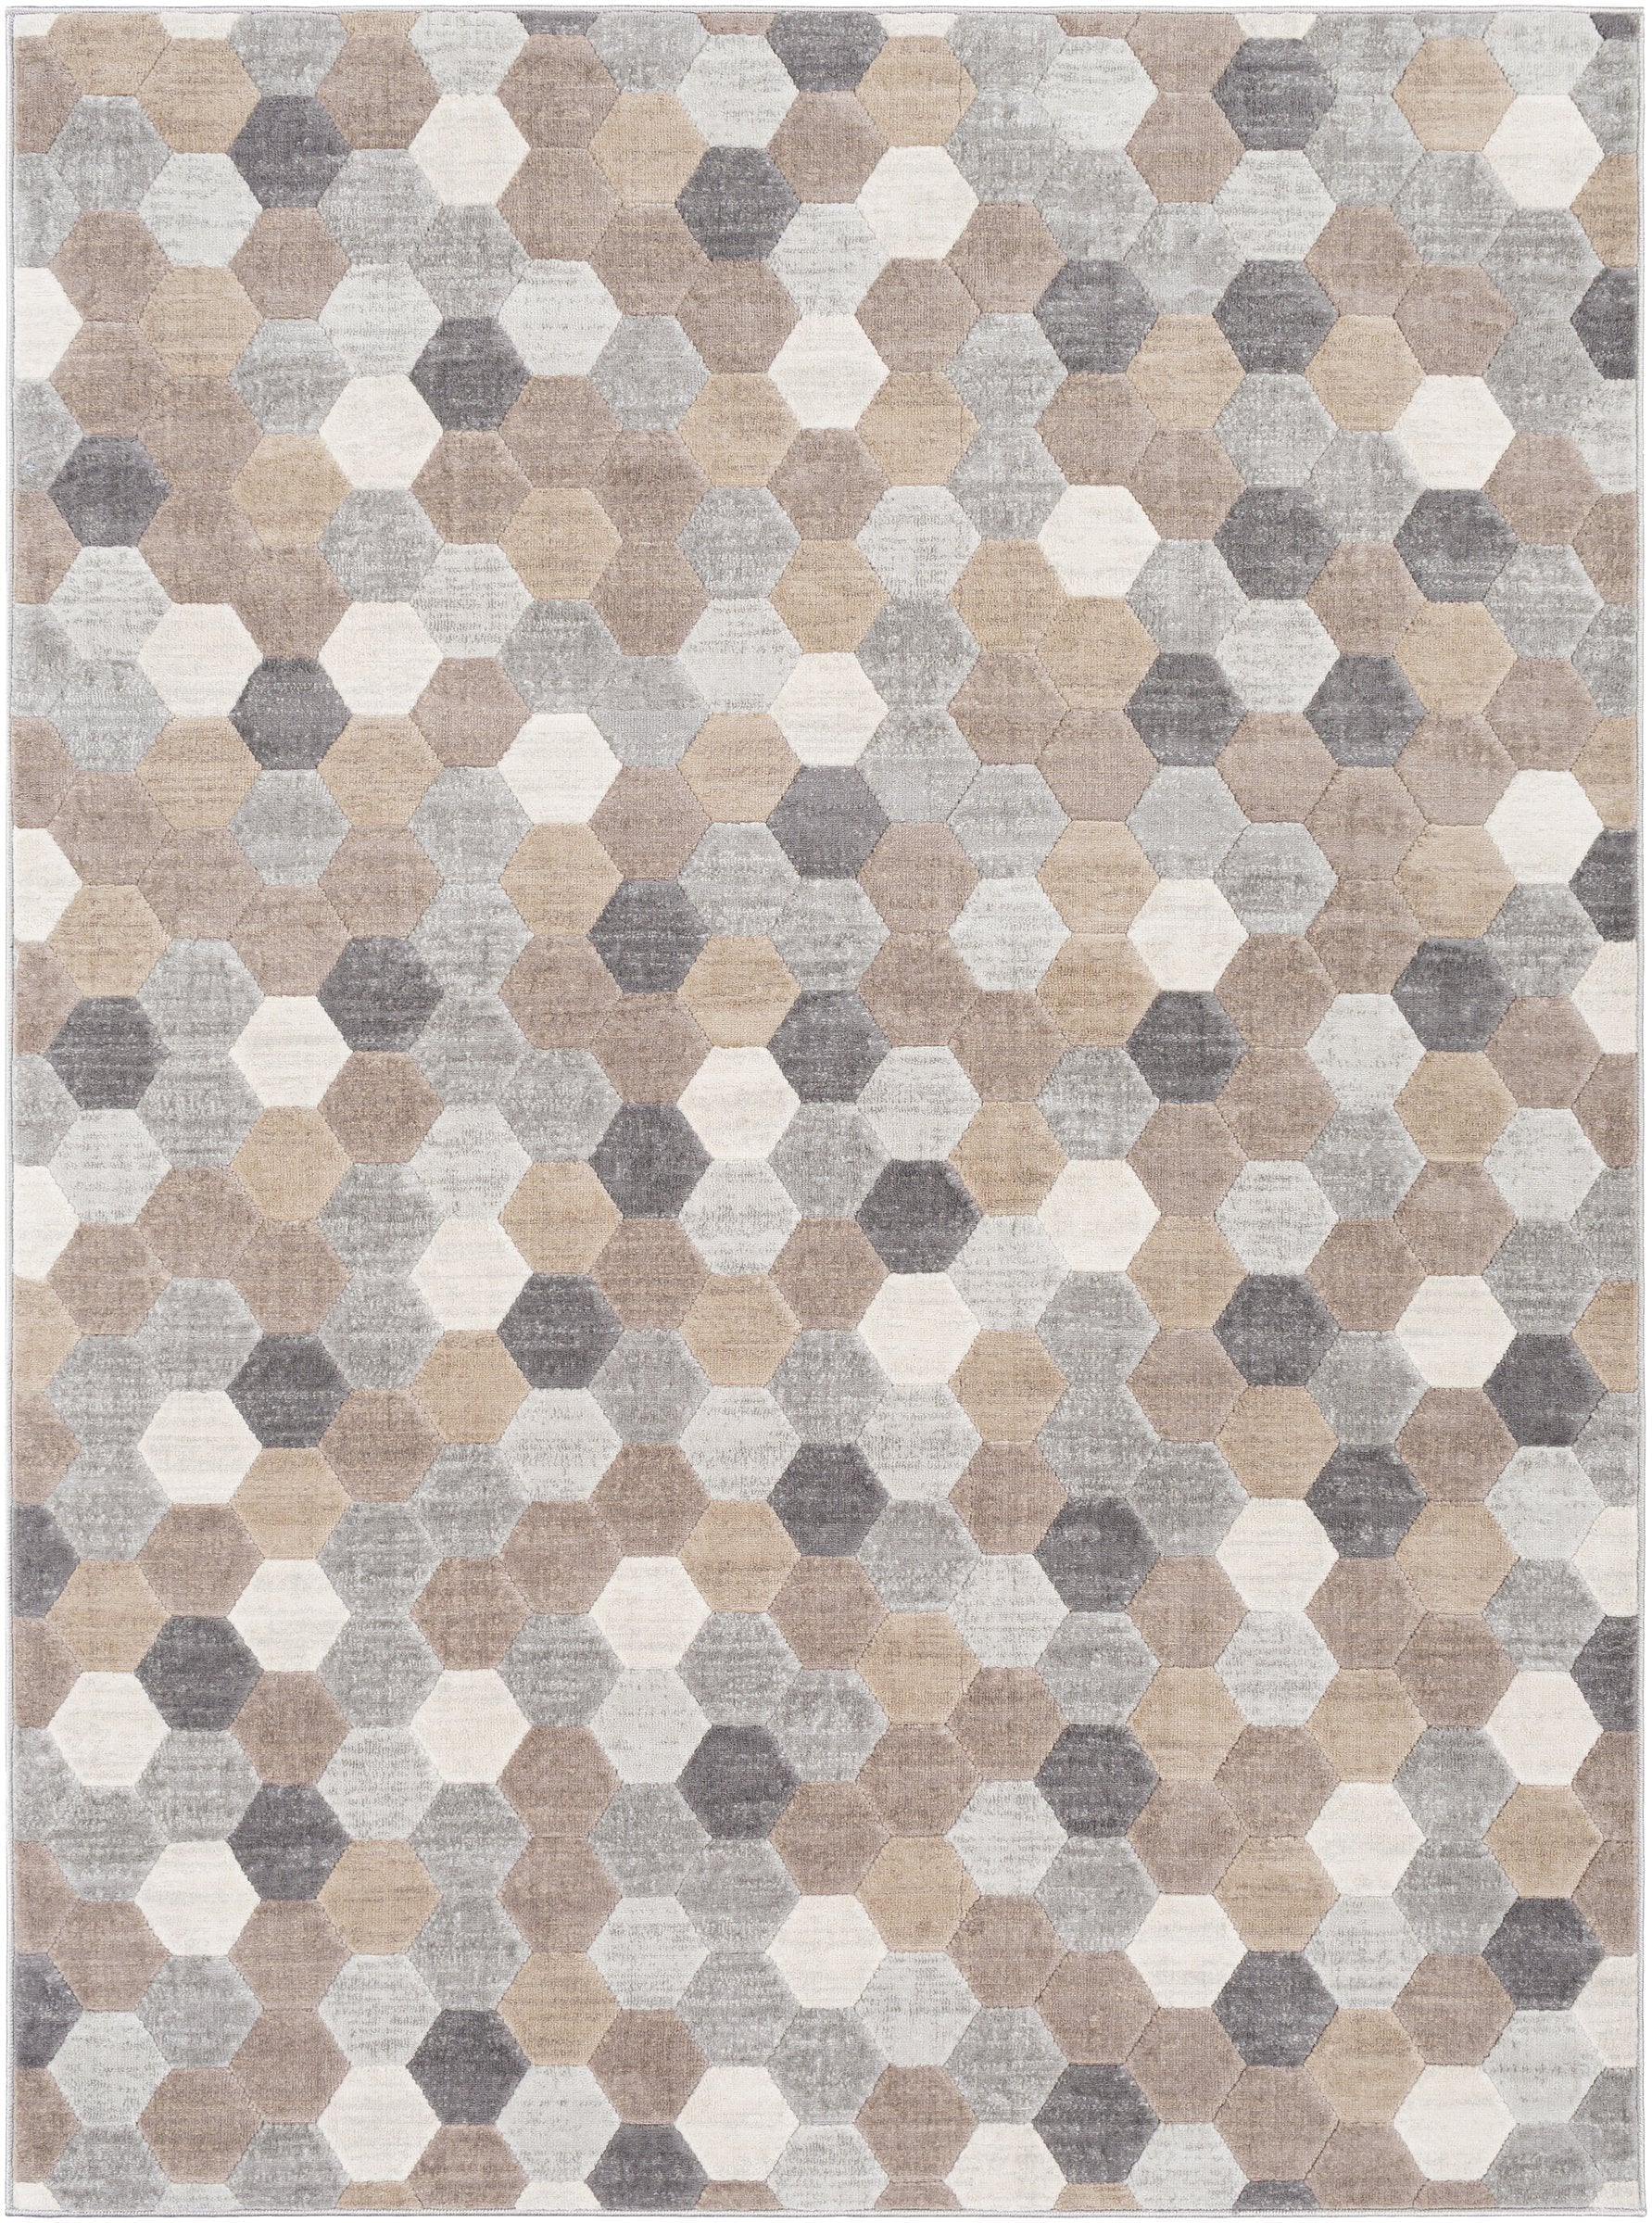 Surya Remy RMY-2301 Area Rug - 5'3" x 7'3" - Linen Universe Co.